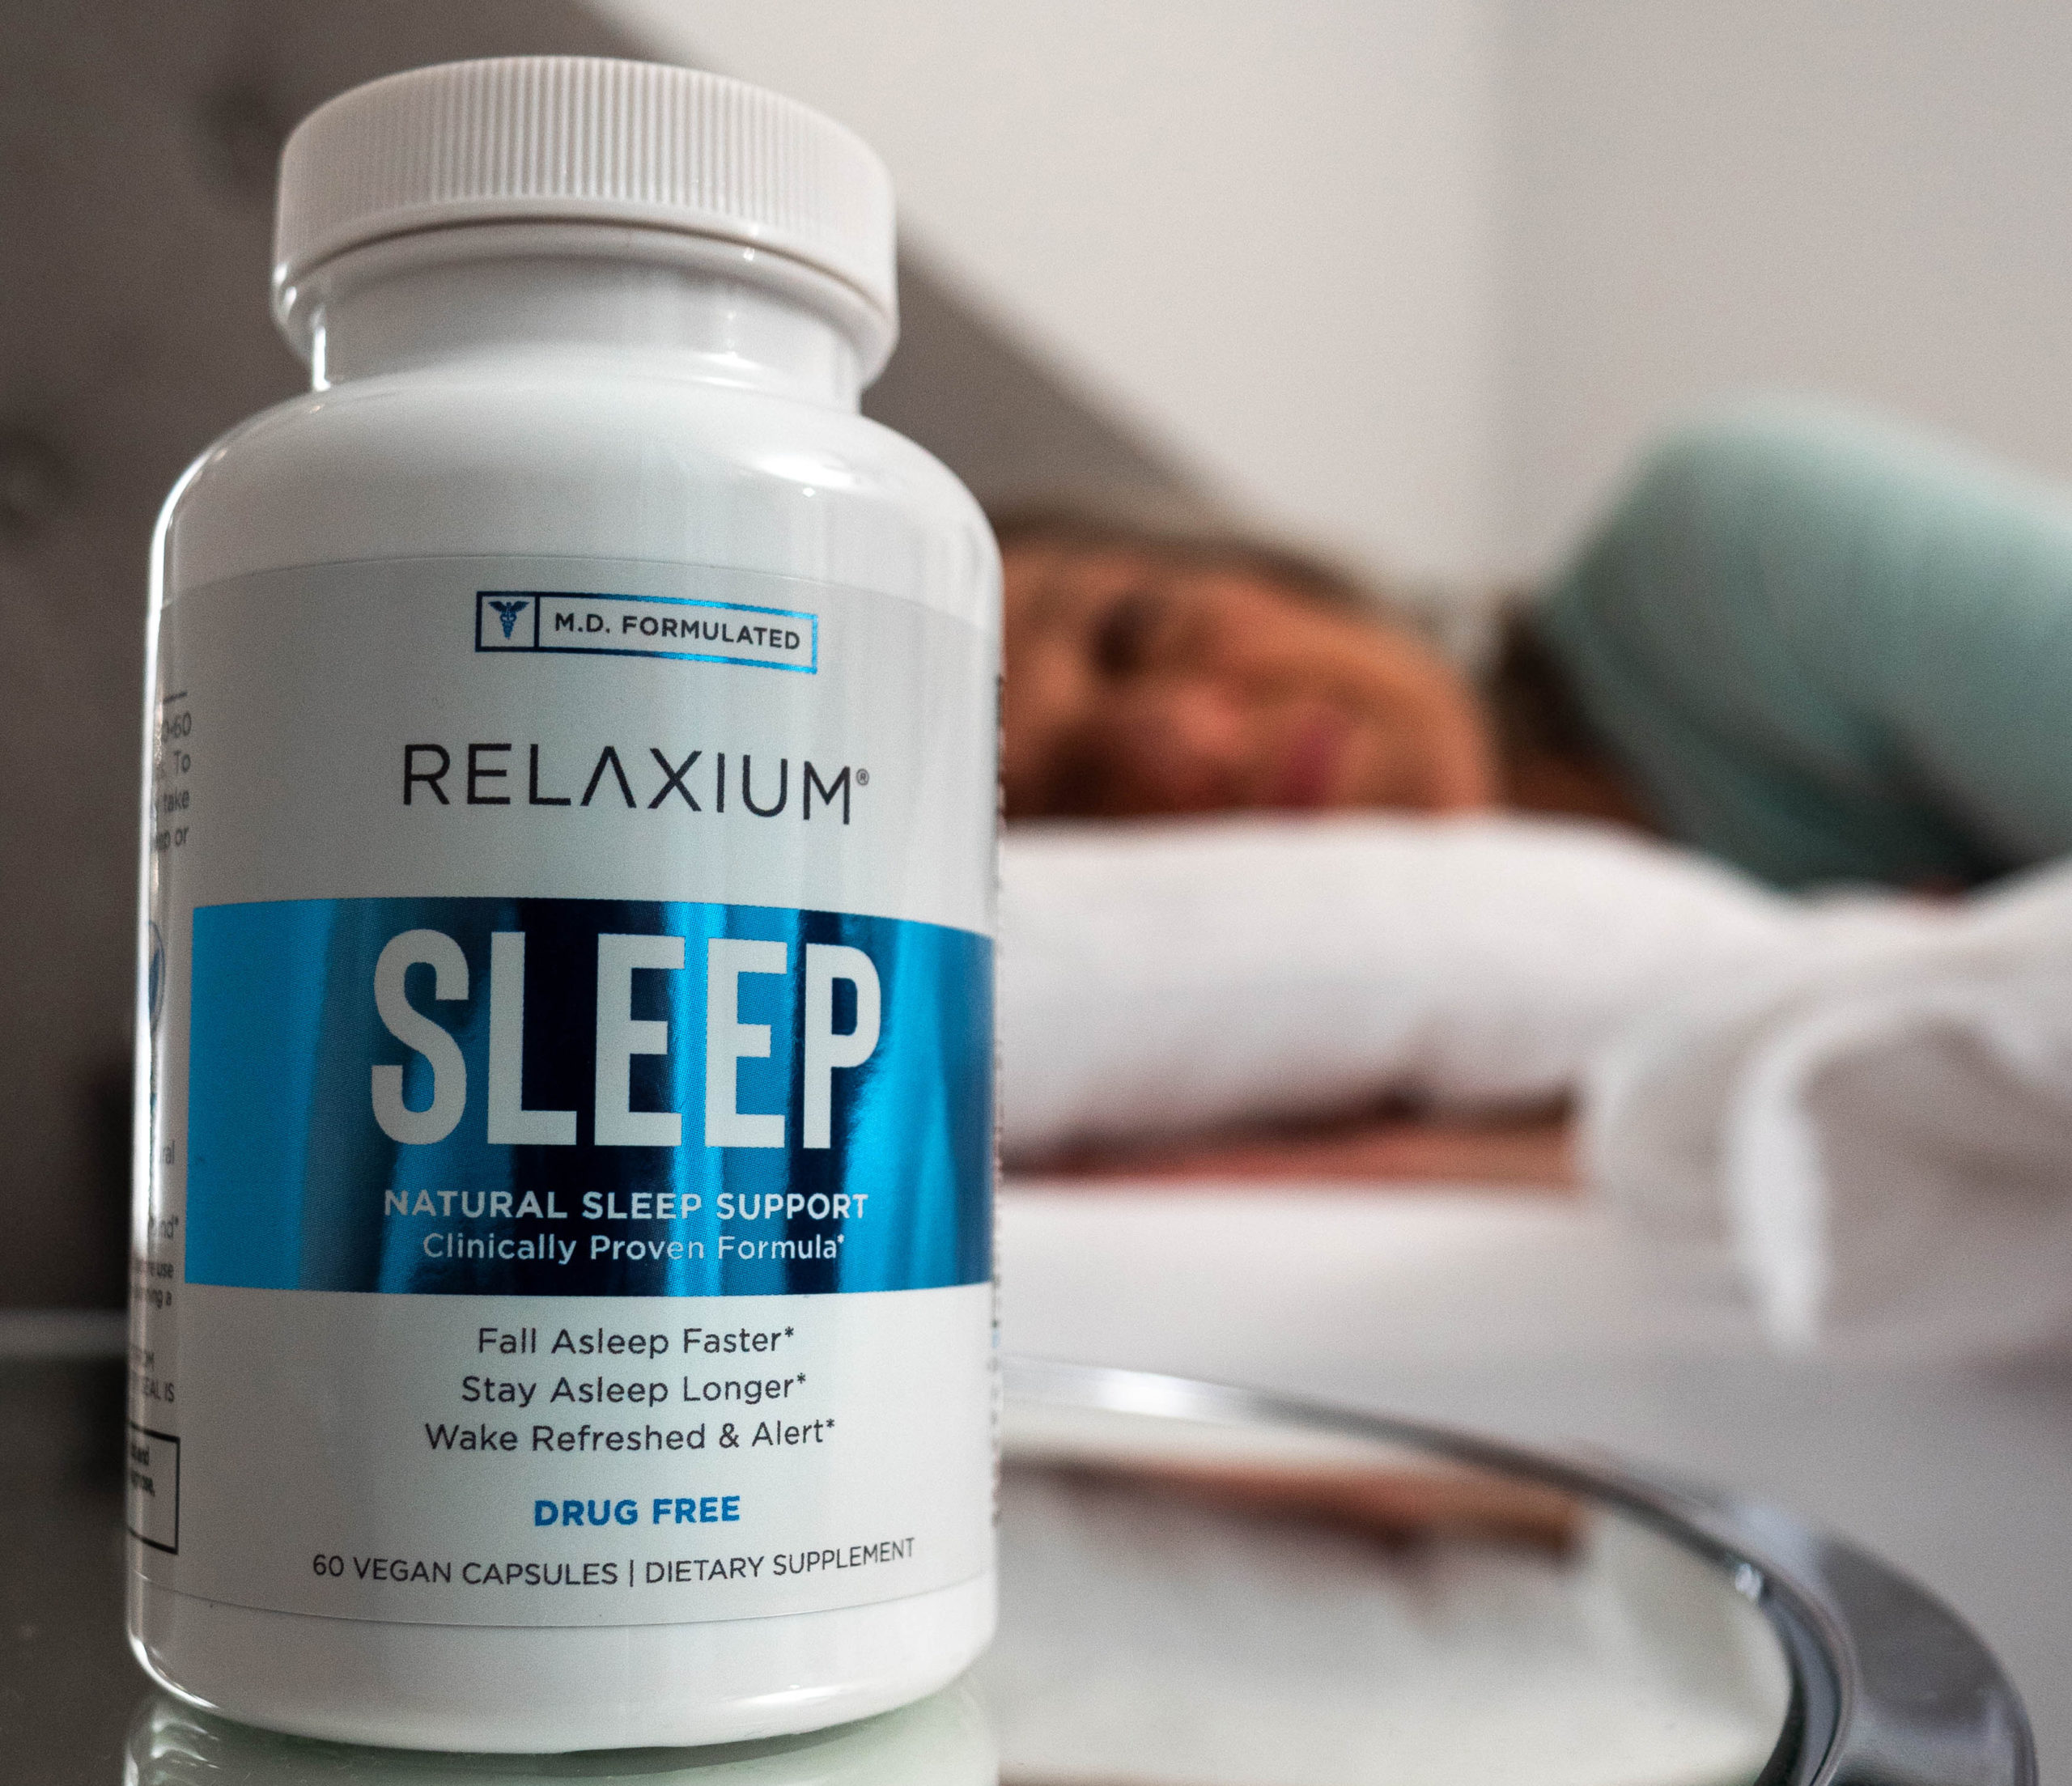 7 Reasons How Relaxium Can Help Your Sleep | PeopleHype